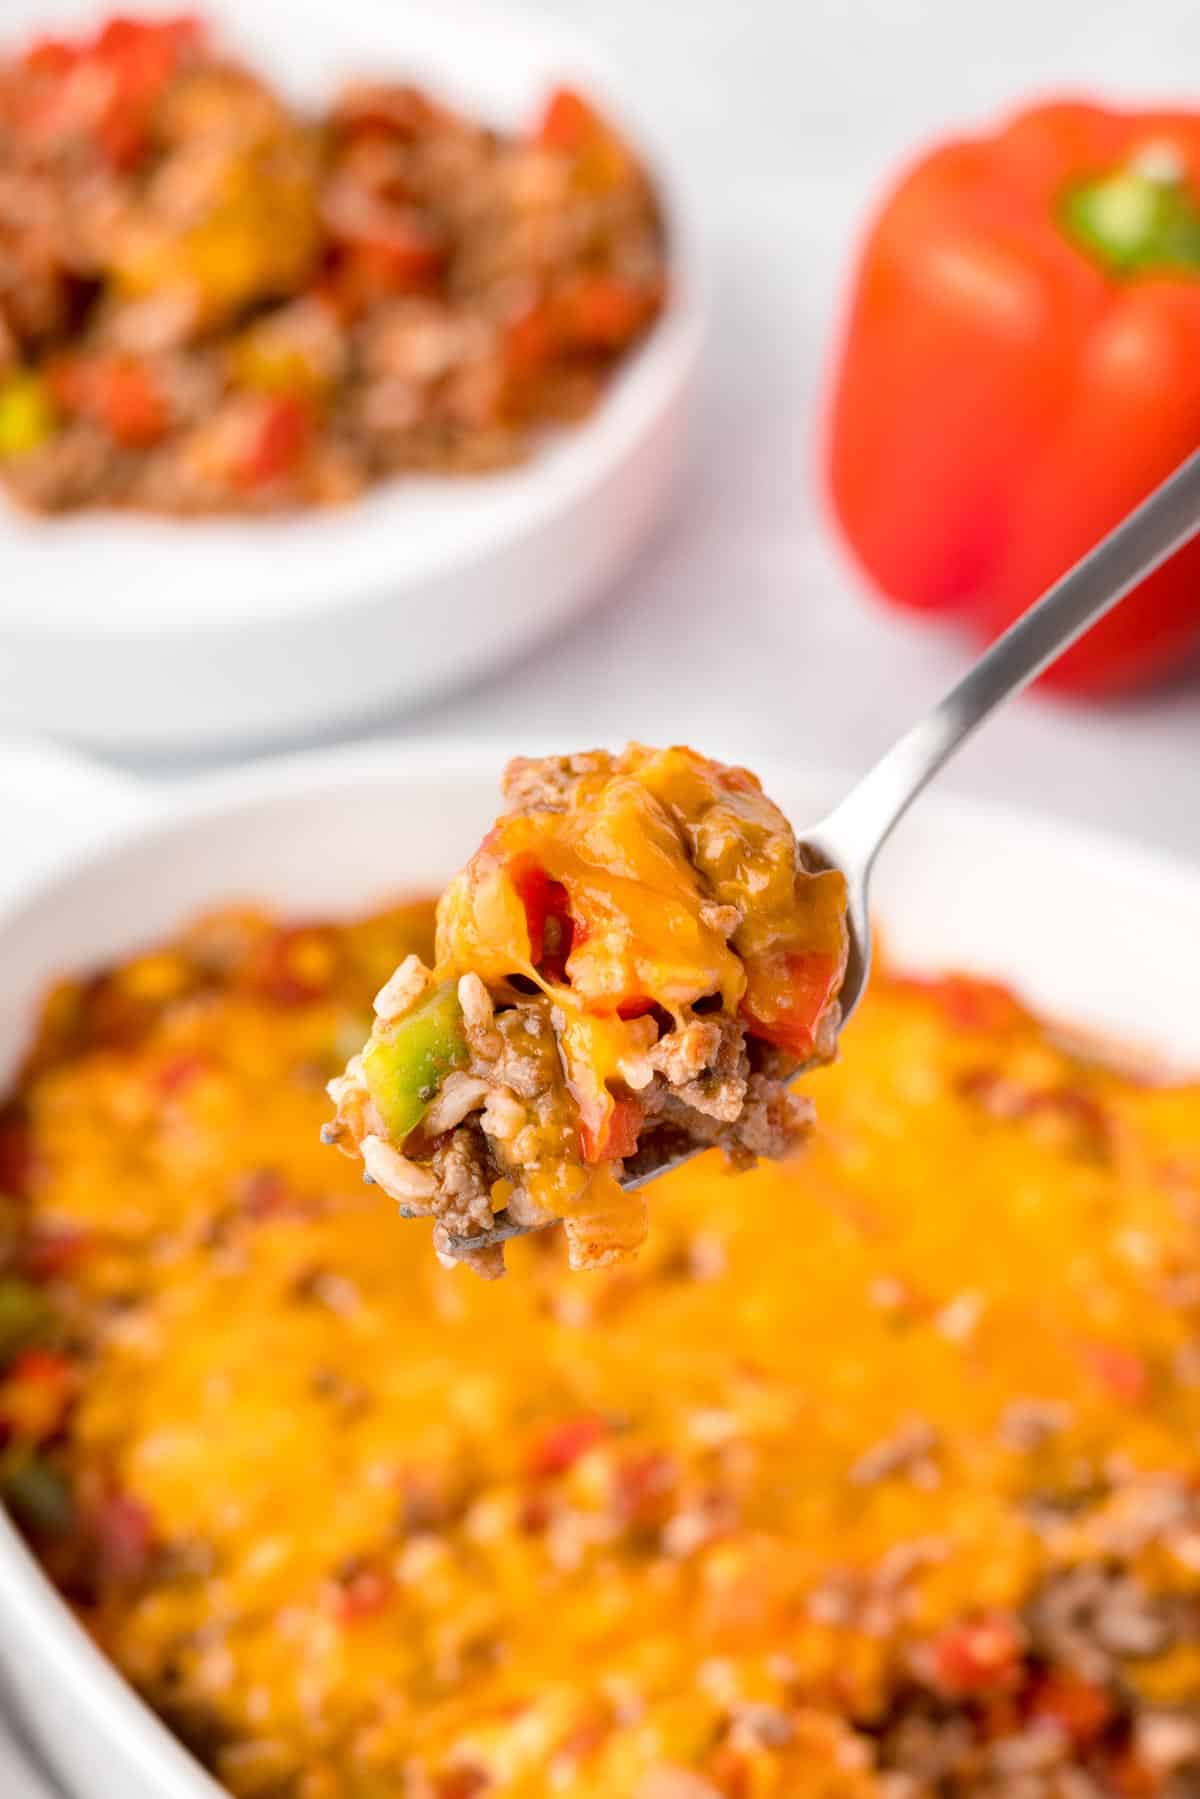 A close up on a spoon holding a bit of unstuffed pepper casserole, with the full casserole seen beneath it and meat and red pepper in the background.